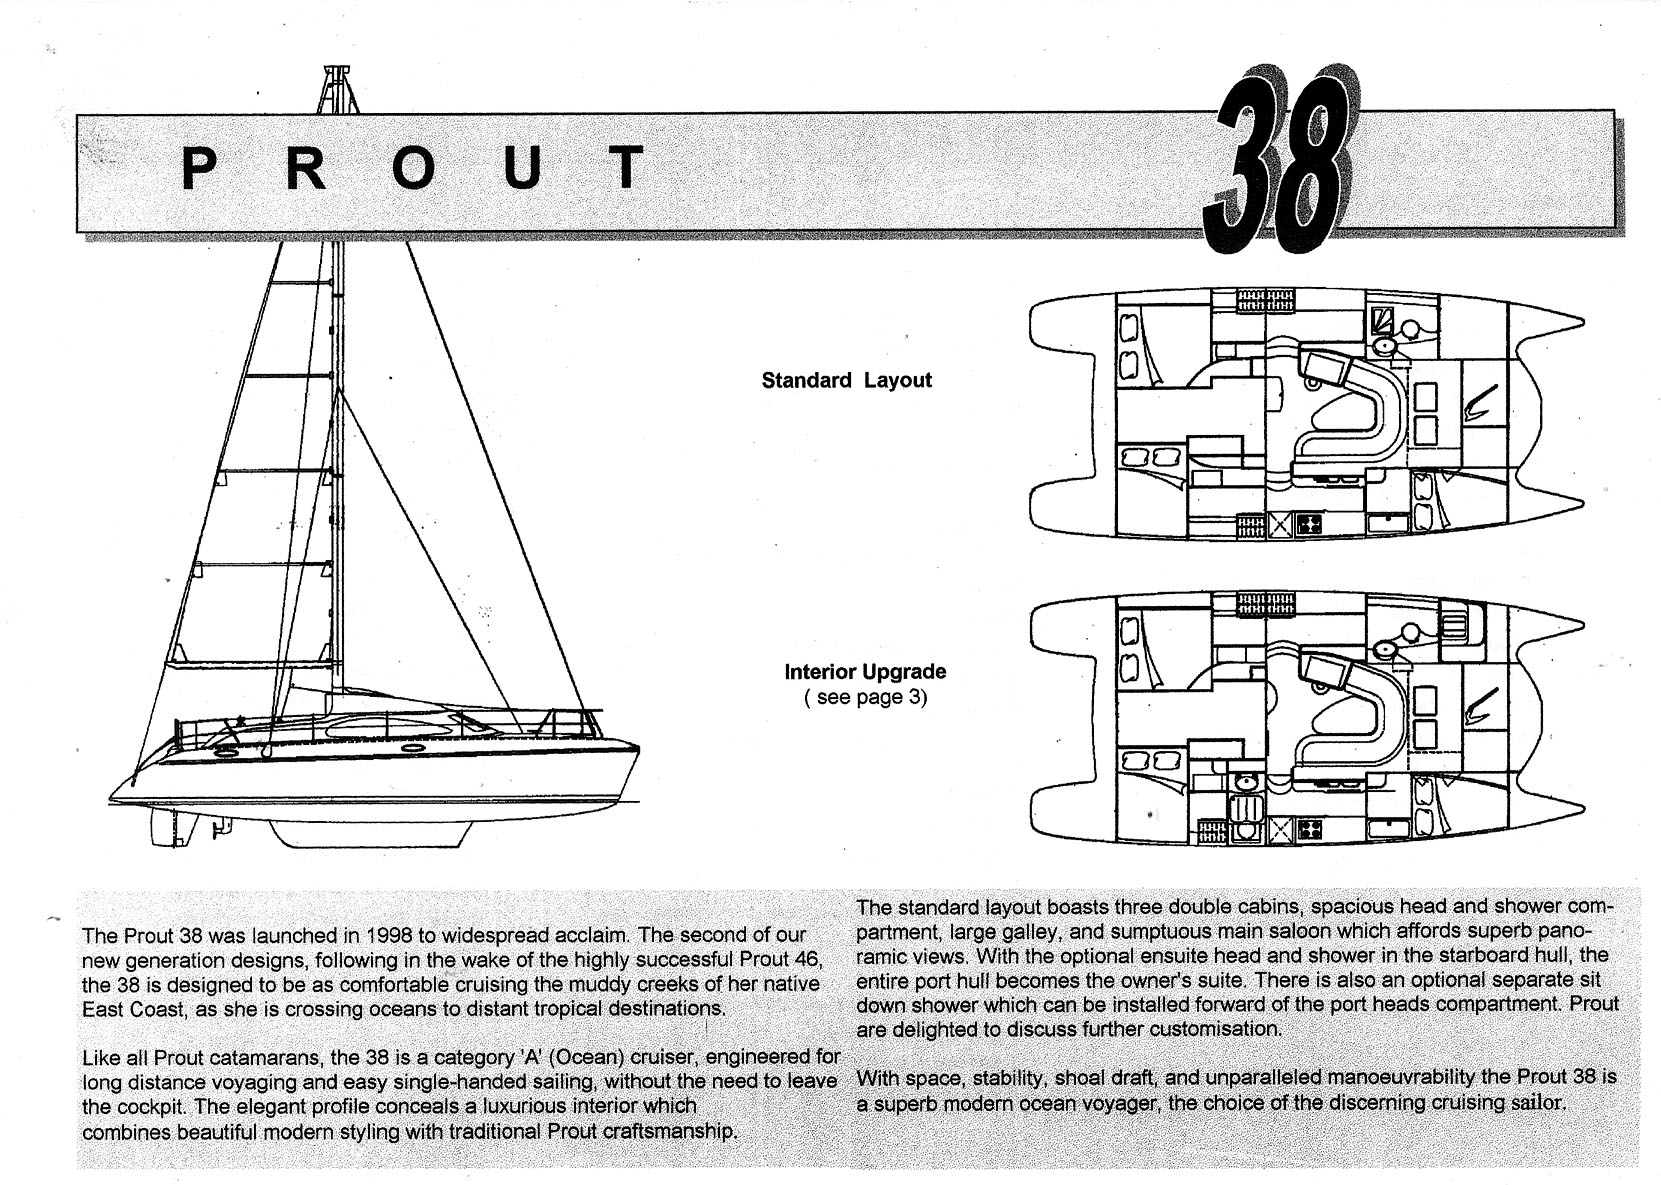 Prout 38 upgrade layout